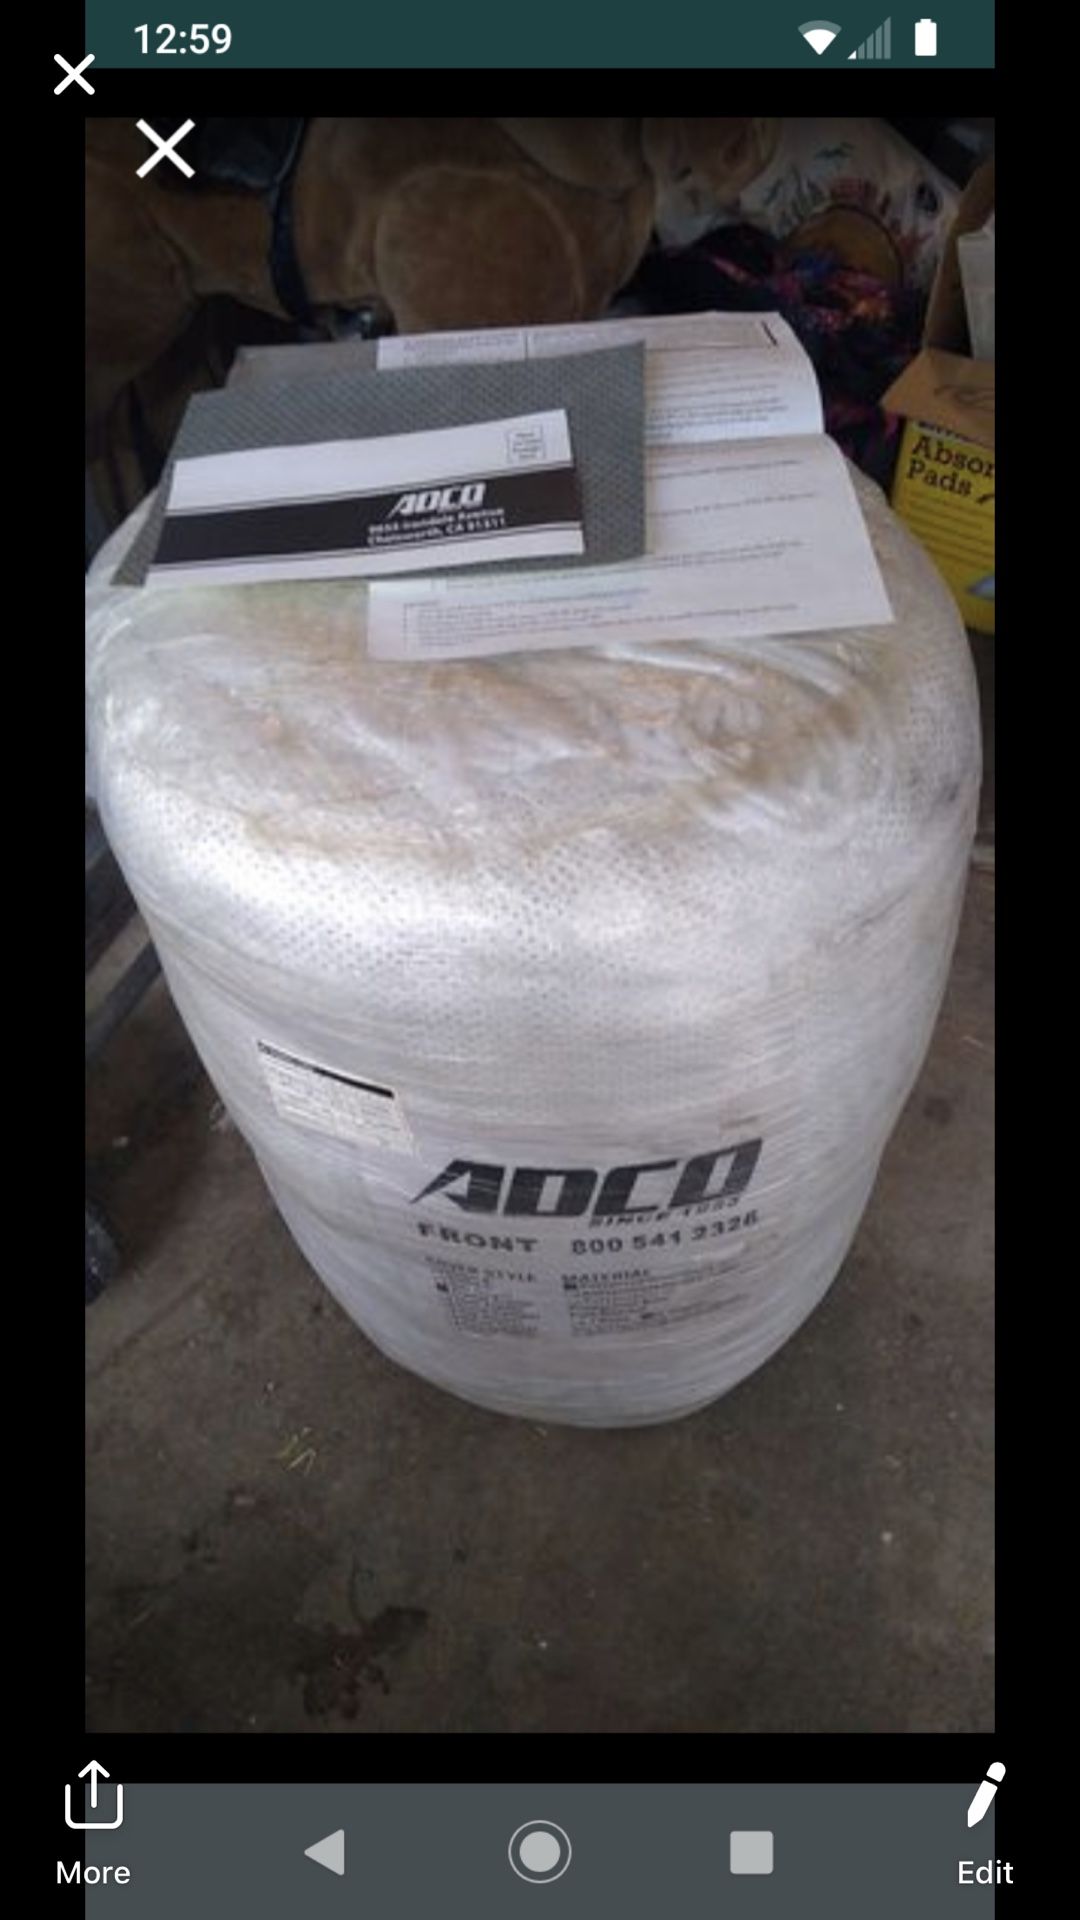 New ADCO Travel Trailer Cover (in original packaging)